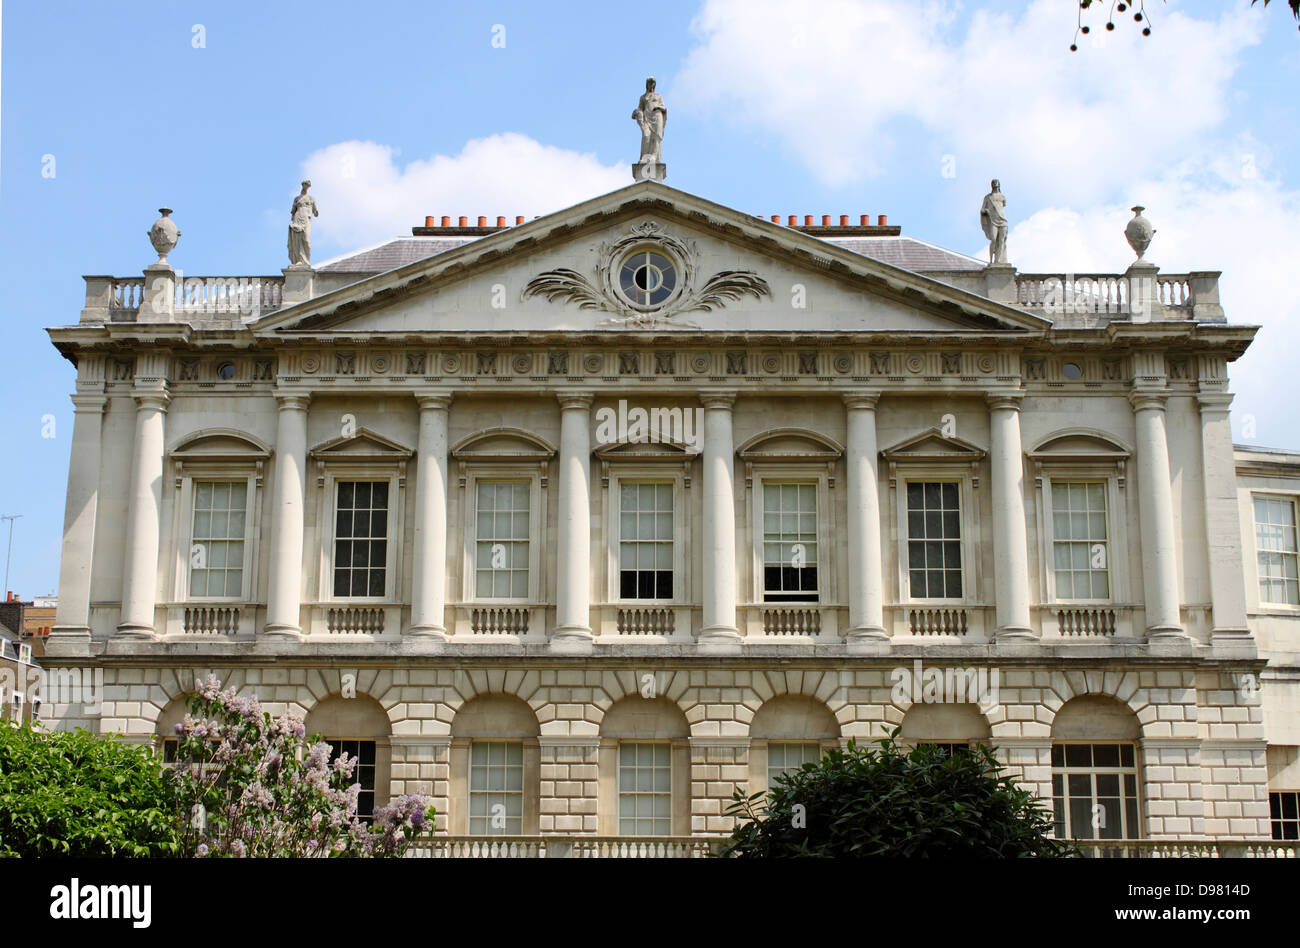 Landscape view of Spencer house in London, UK Stock Photo